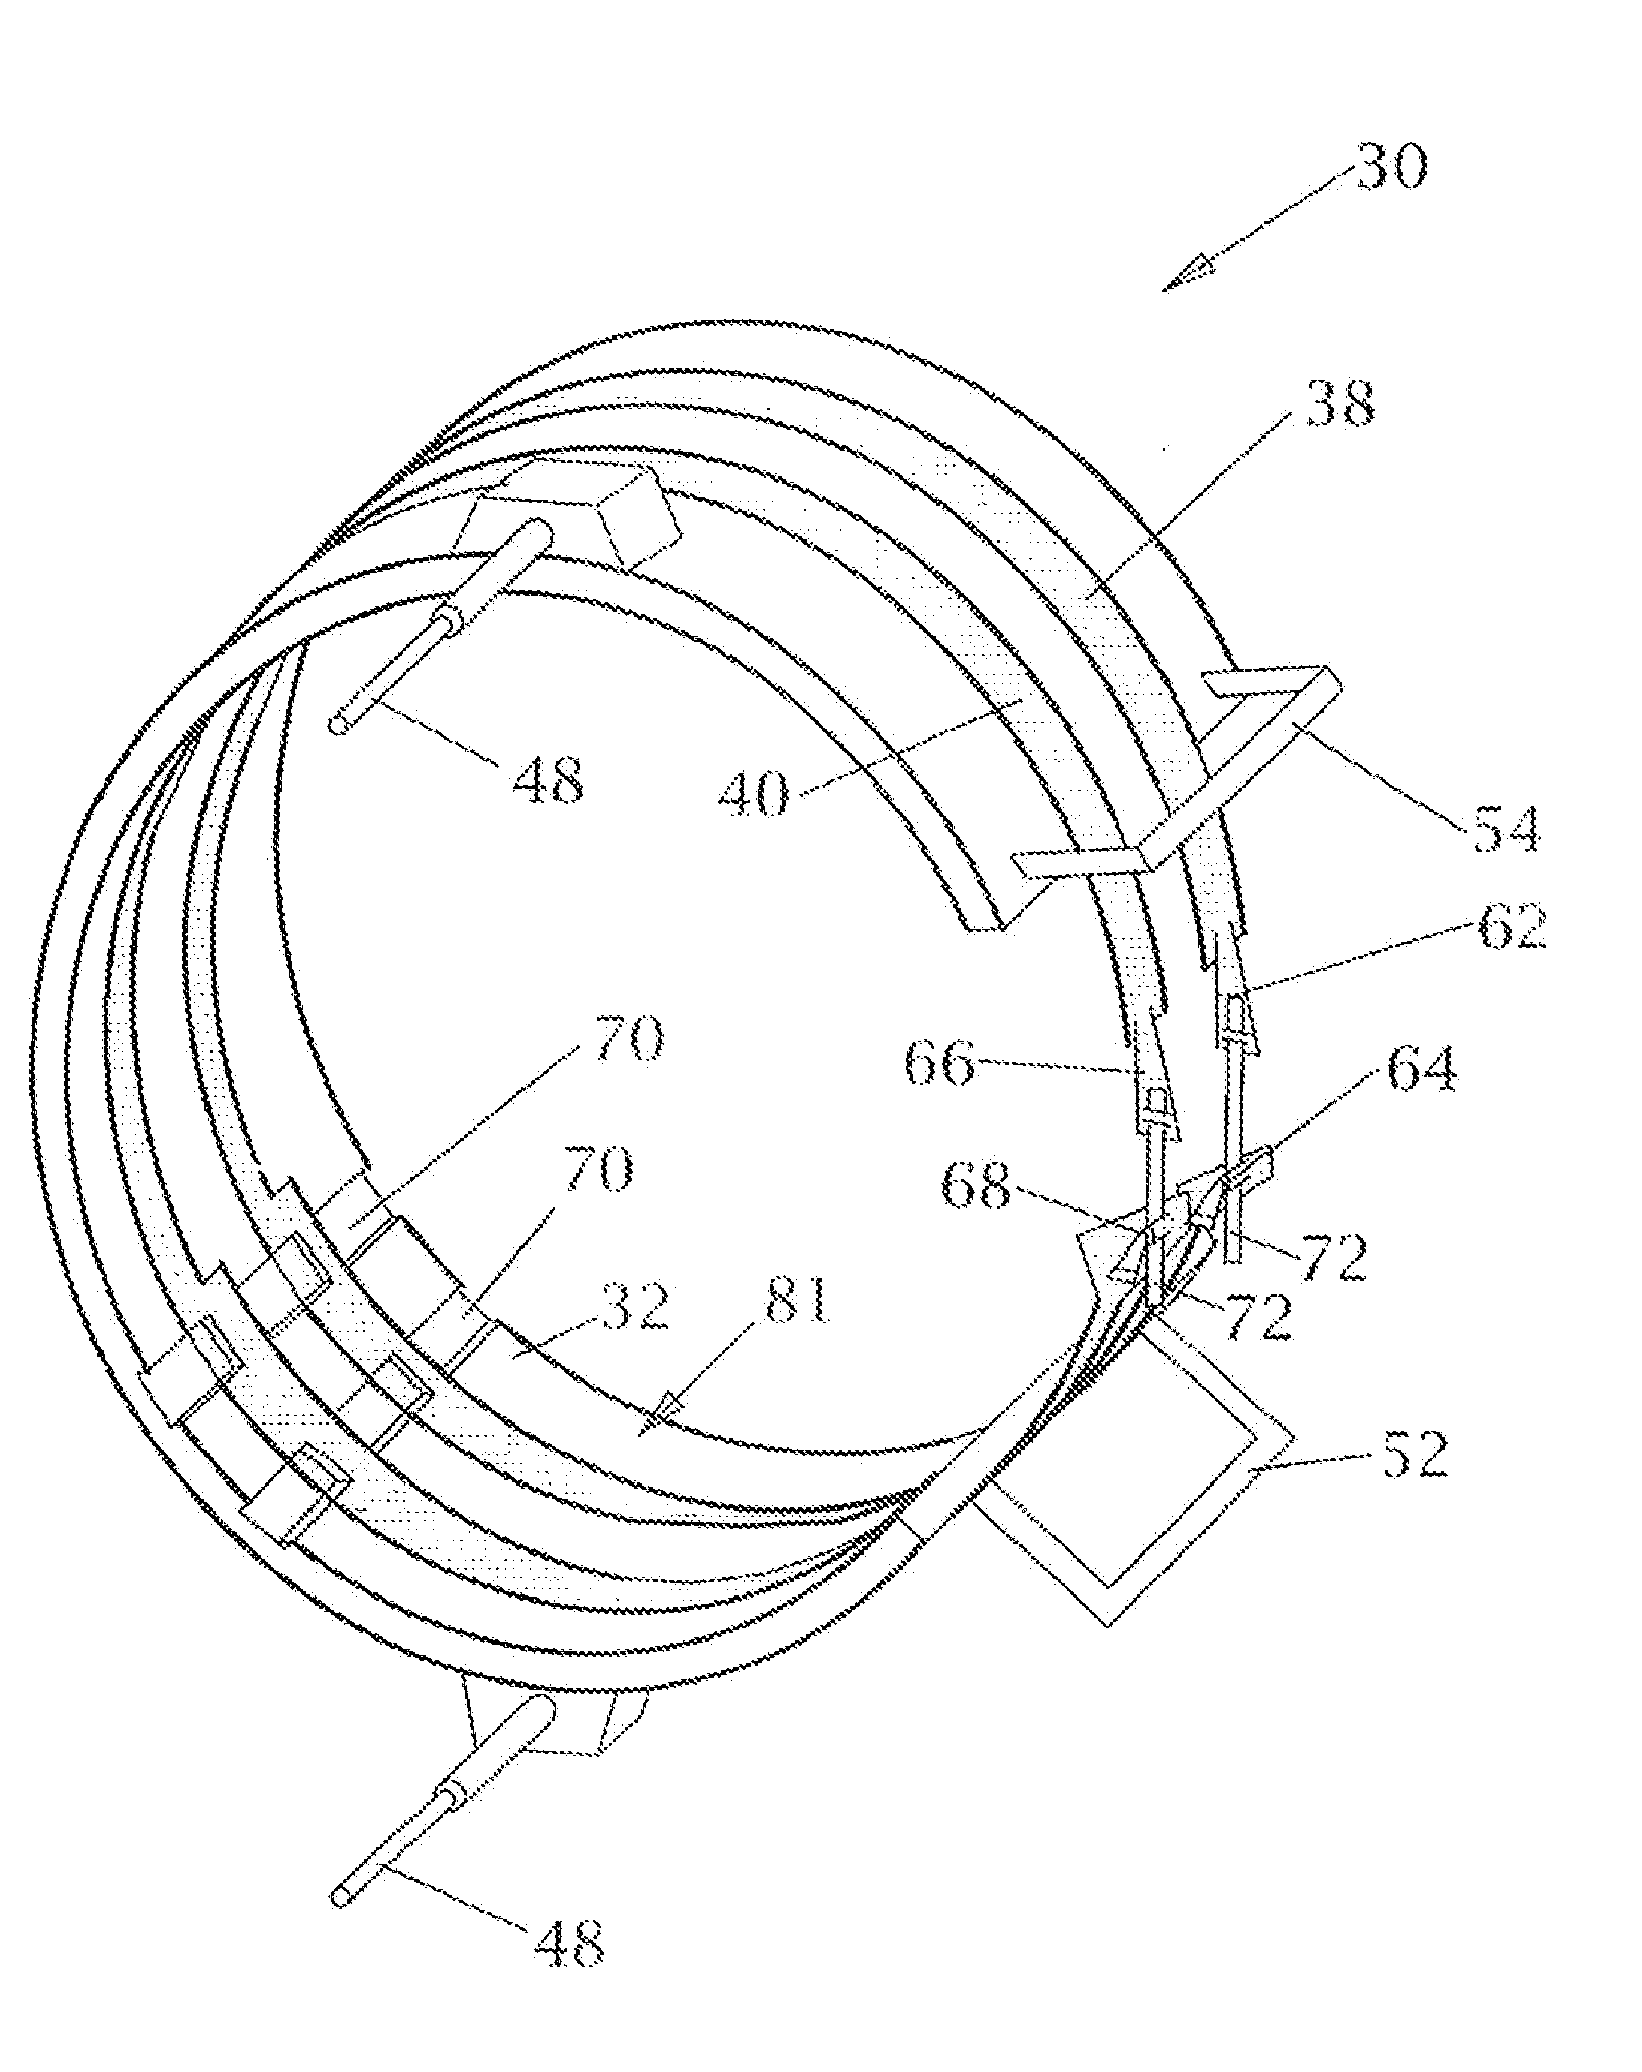 Apparatus and Method for Monitoring the Mechanical Properties of Subsea Longitudinal Vertical Components in Offshore Drilling and Production Applications